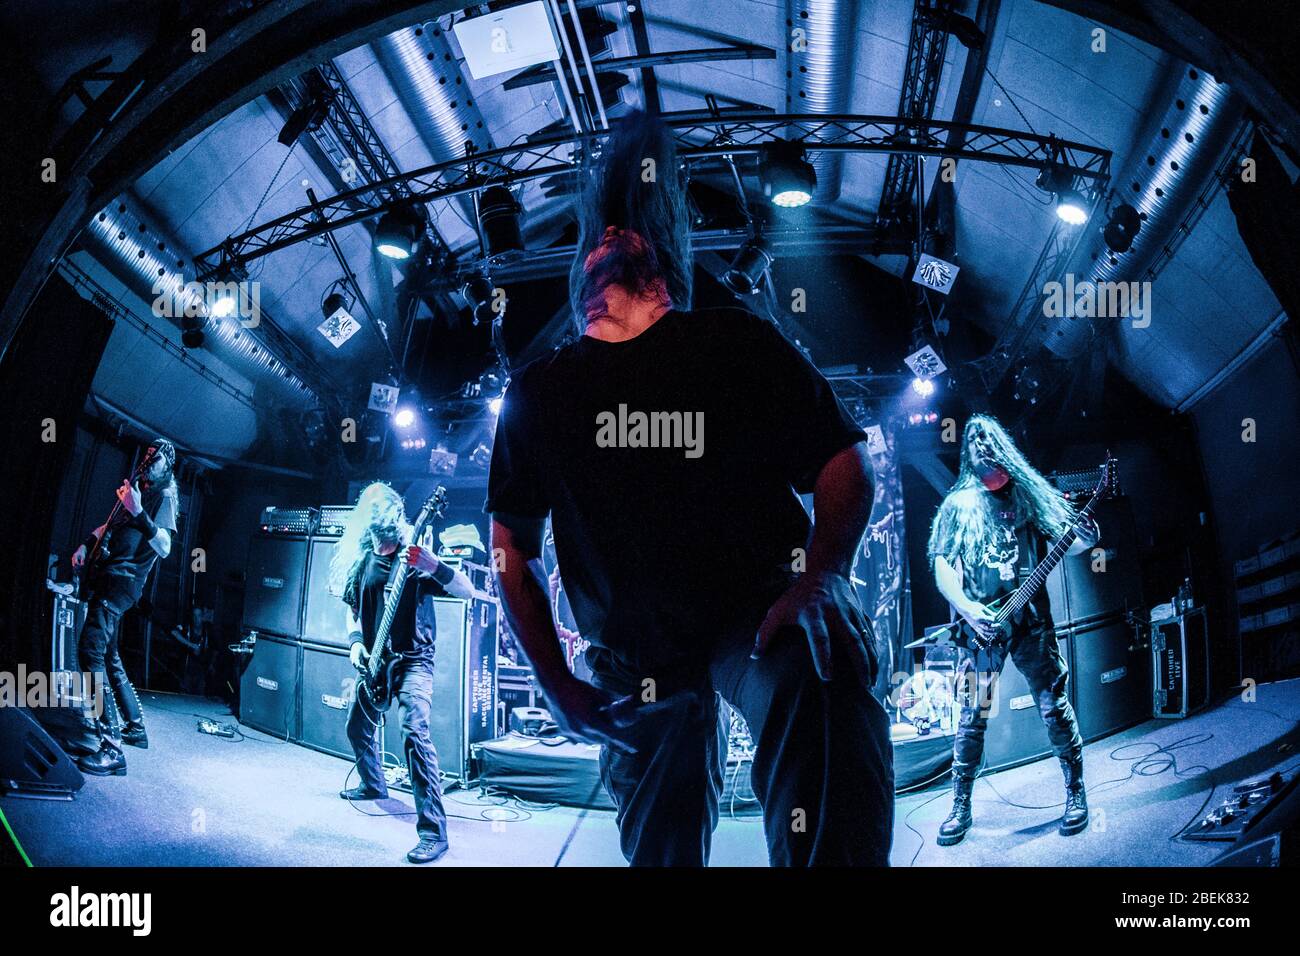 Kolding, Denmark. 15th, February 2018. The American death metal band Cannibal Corpse performs a live concert at Godset in Kolding. Here vocalist George Fisher a.k.a. Corpsgrinder is seen live on stage. (Photo credit: Gonzales Photo - Lasse Lagoni). Stock Photo